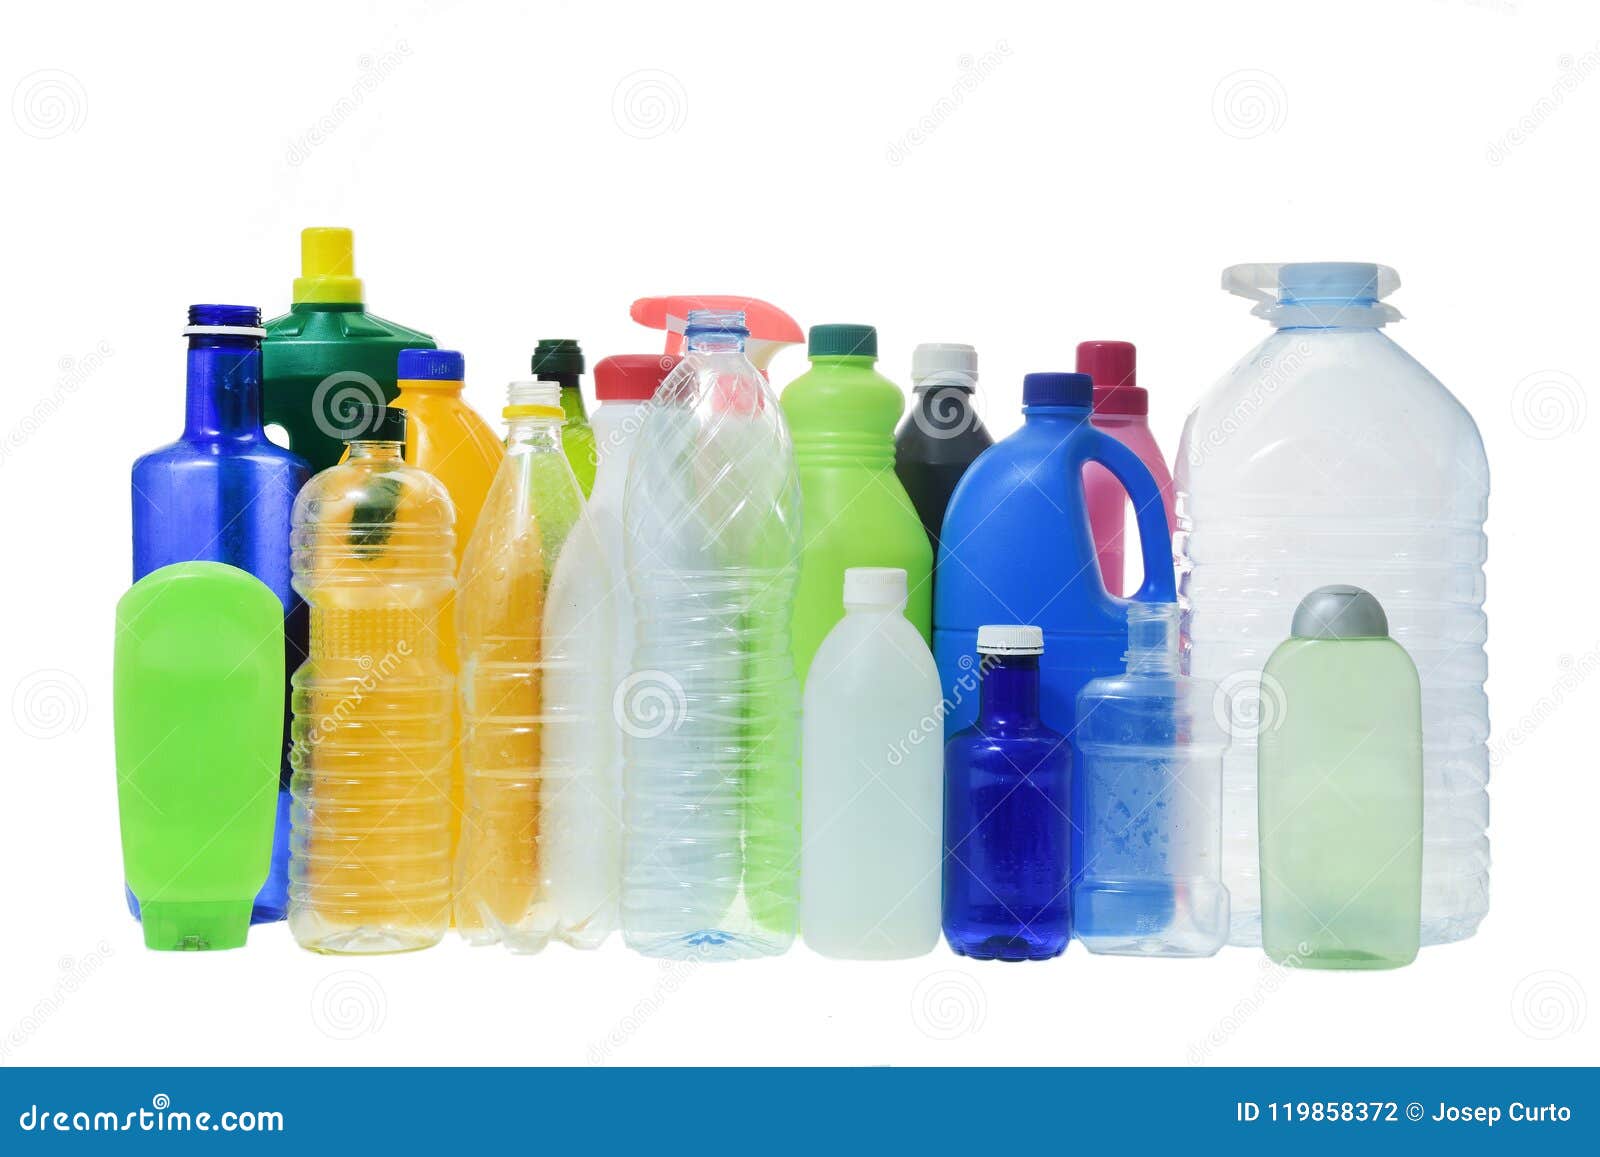 group of plastic on white background